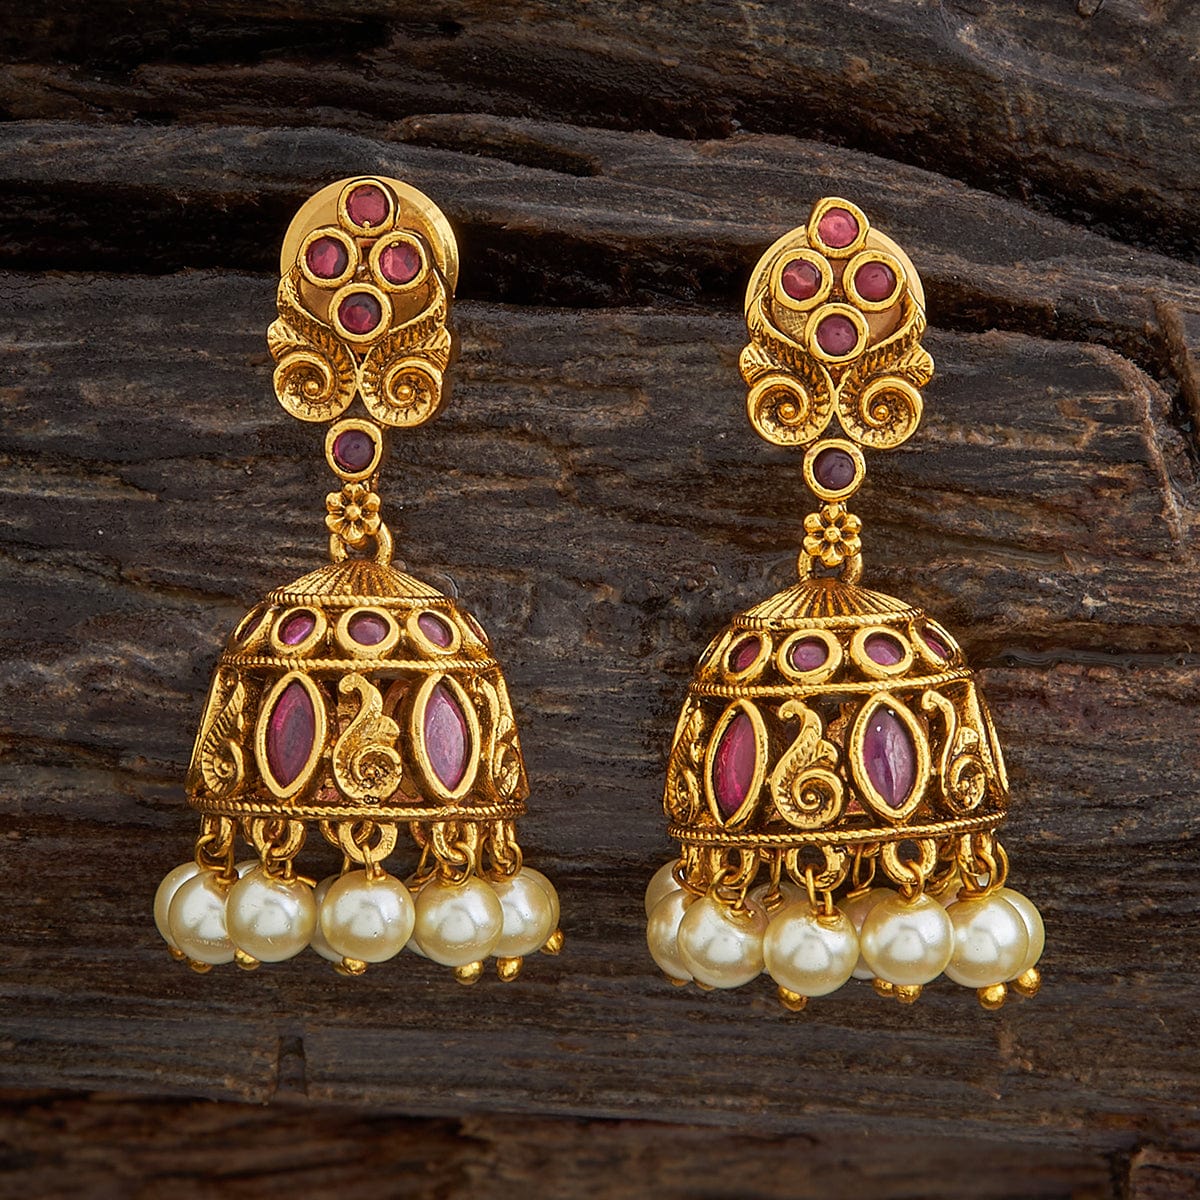 Buy Kushal's Fashion Jewellery Gold-Plated Jhumka Earrings with Hued Stone  Embellishments, Traditional Design and Intricate Jaali Detailing with White  Pearl Hangings | Antique Earrings at Amazon.in